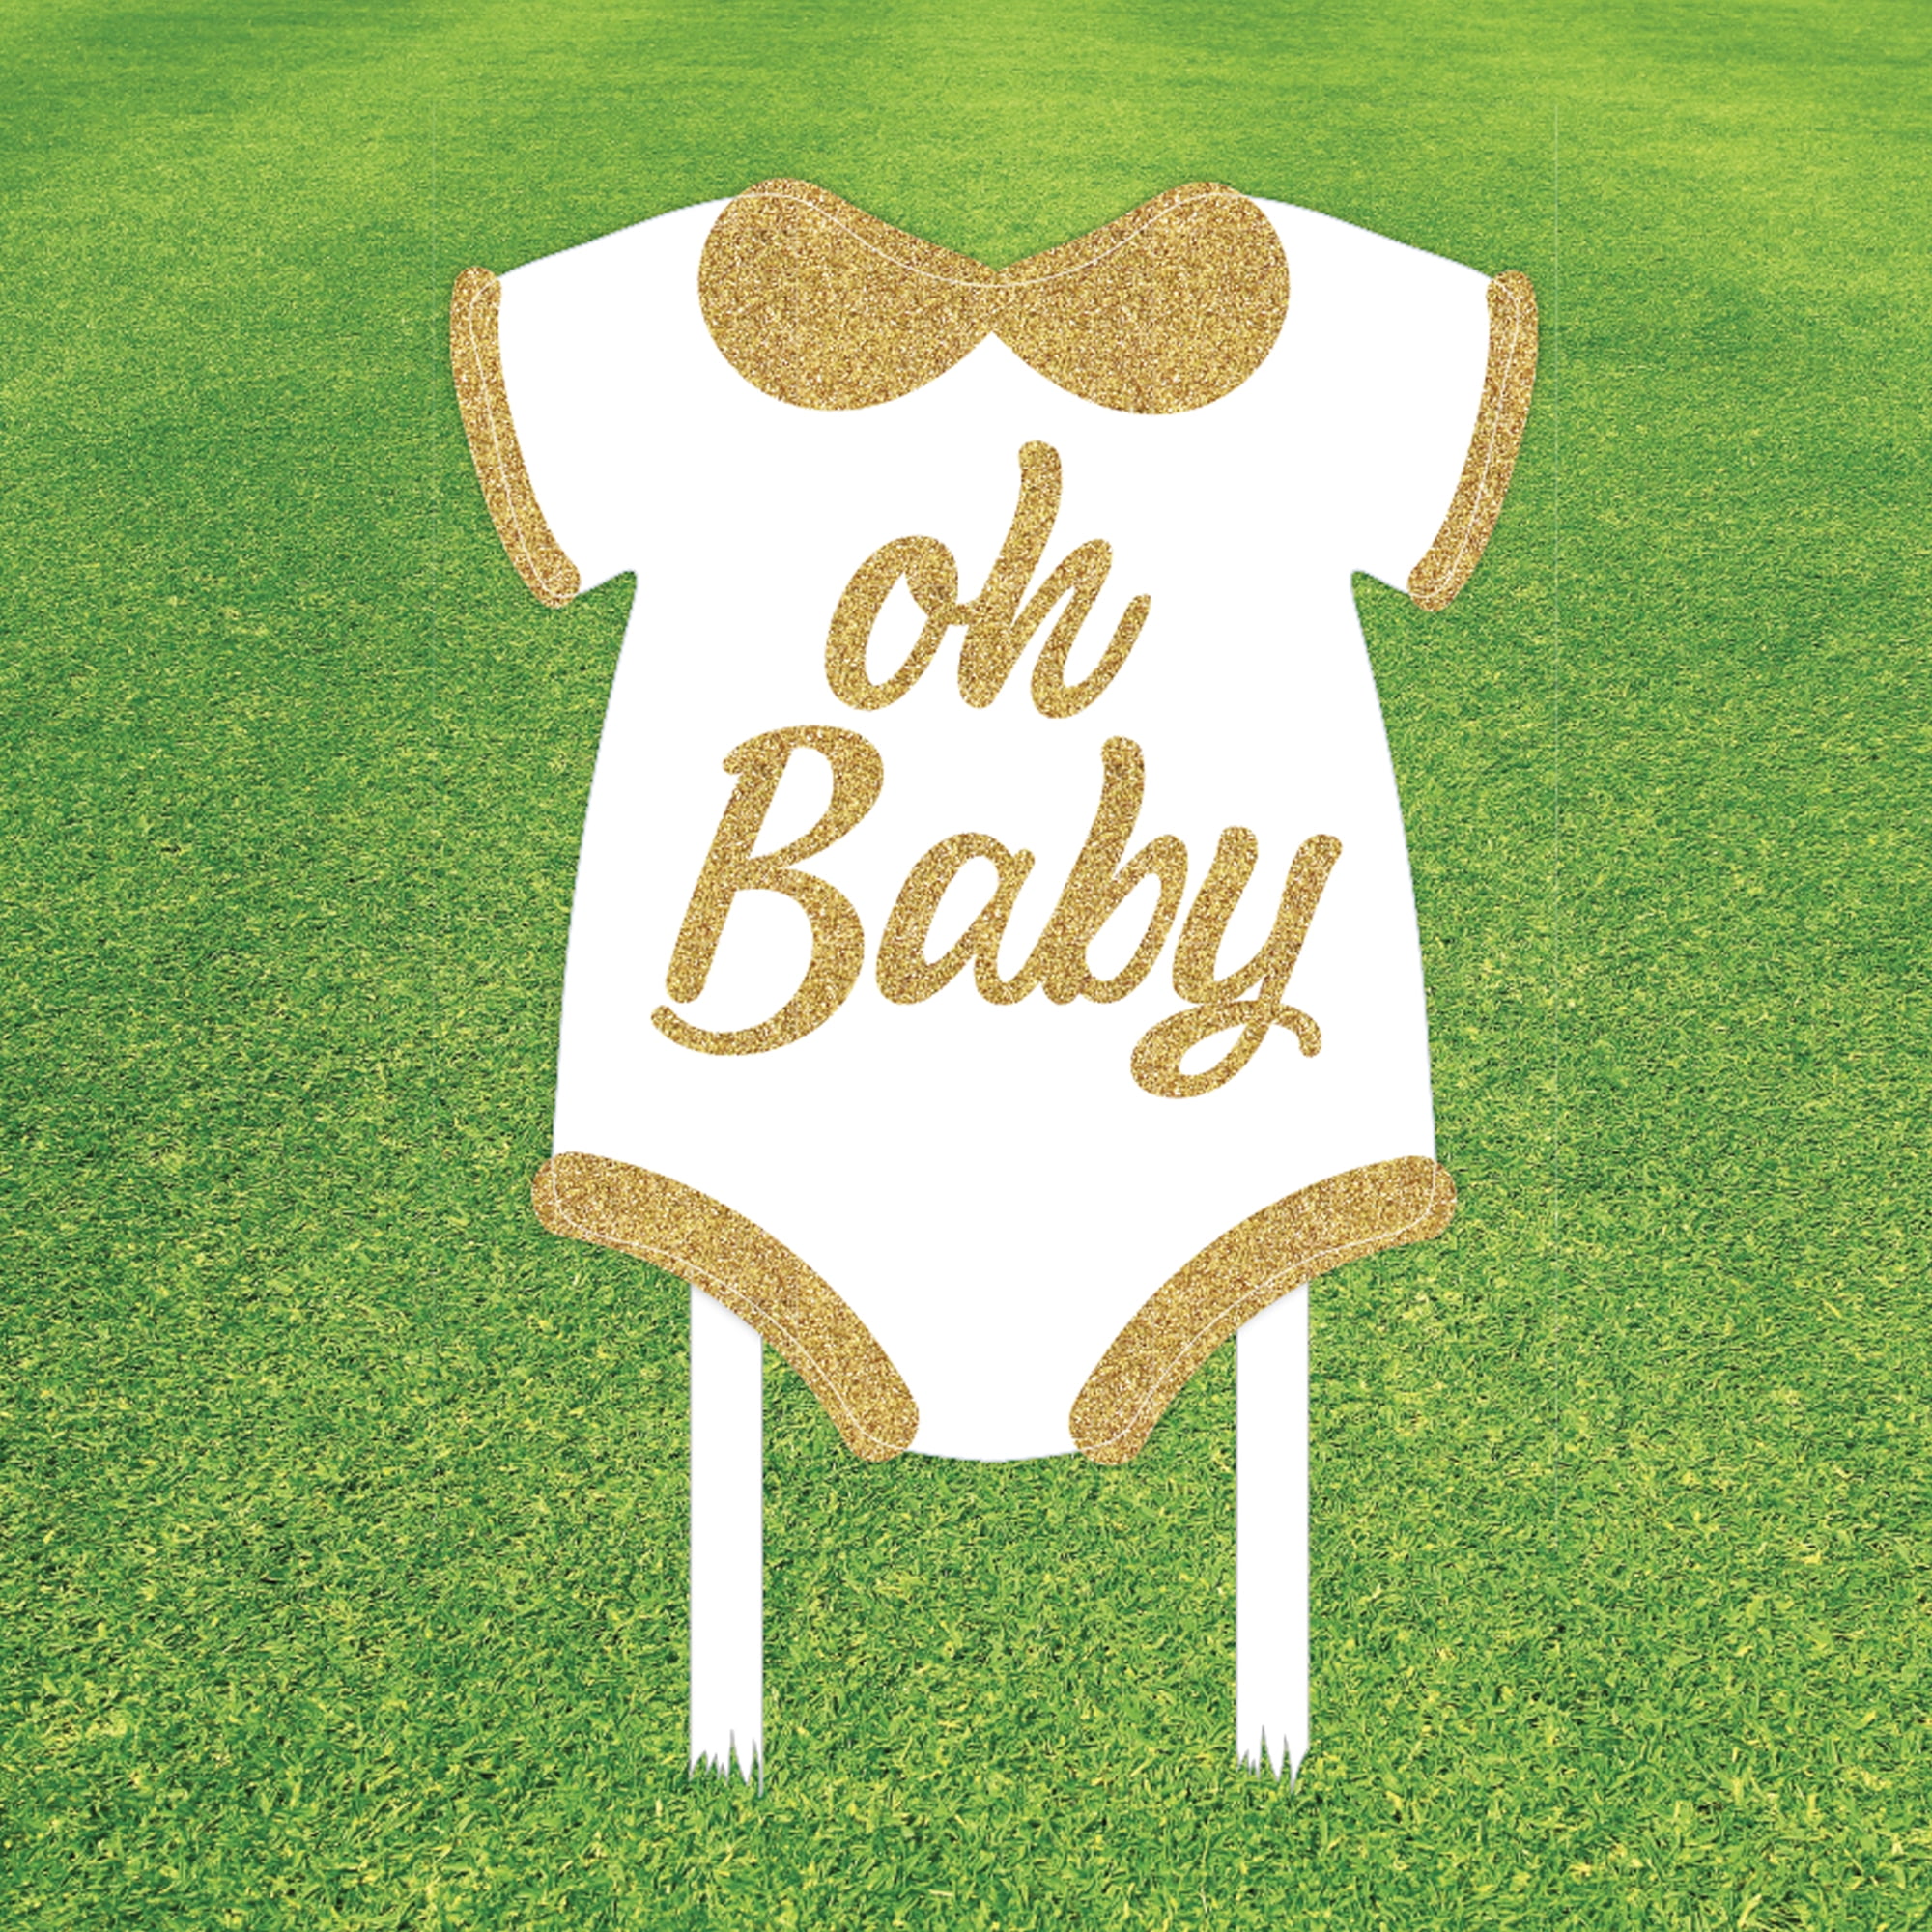 Celebrations Oh Baby Onesie Lawn Sign